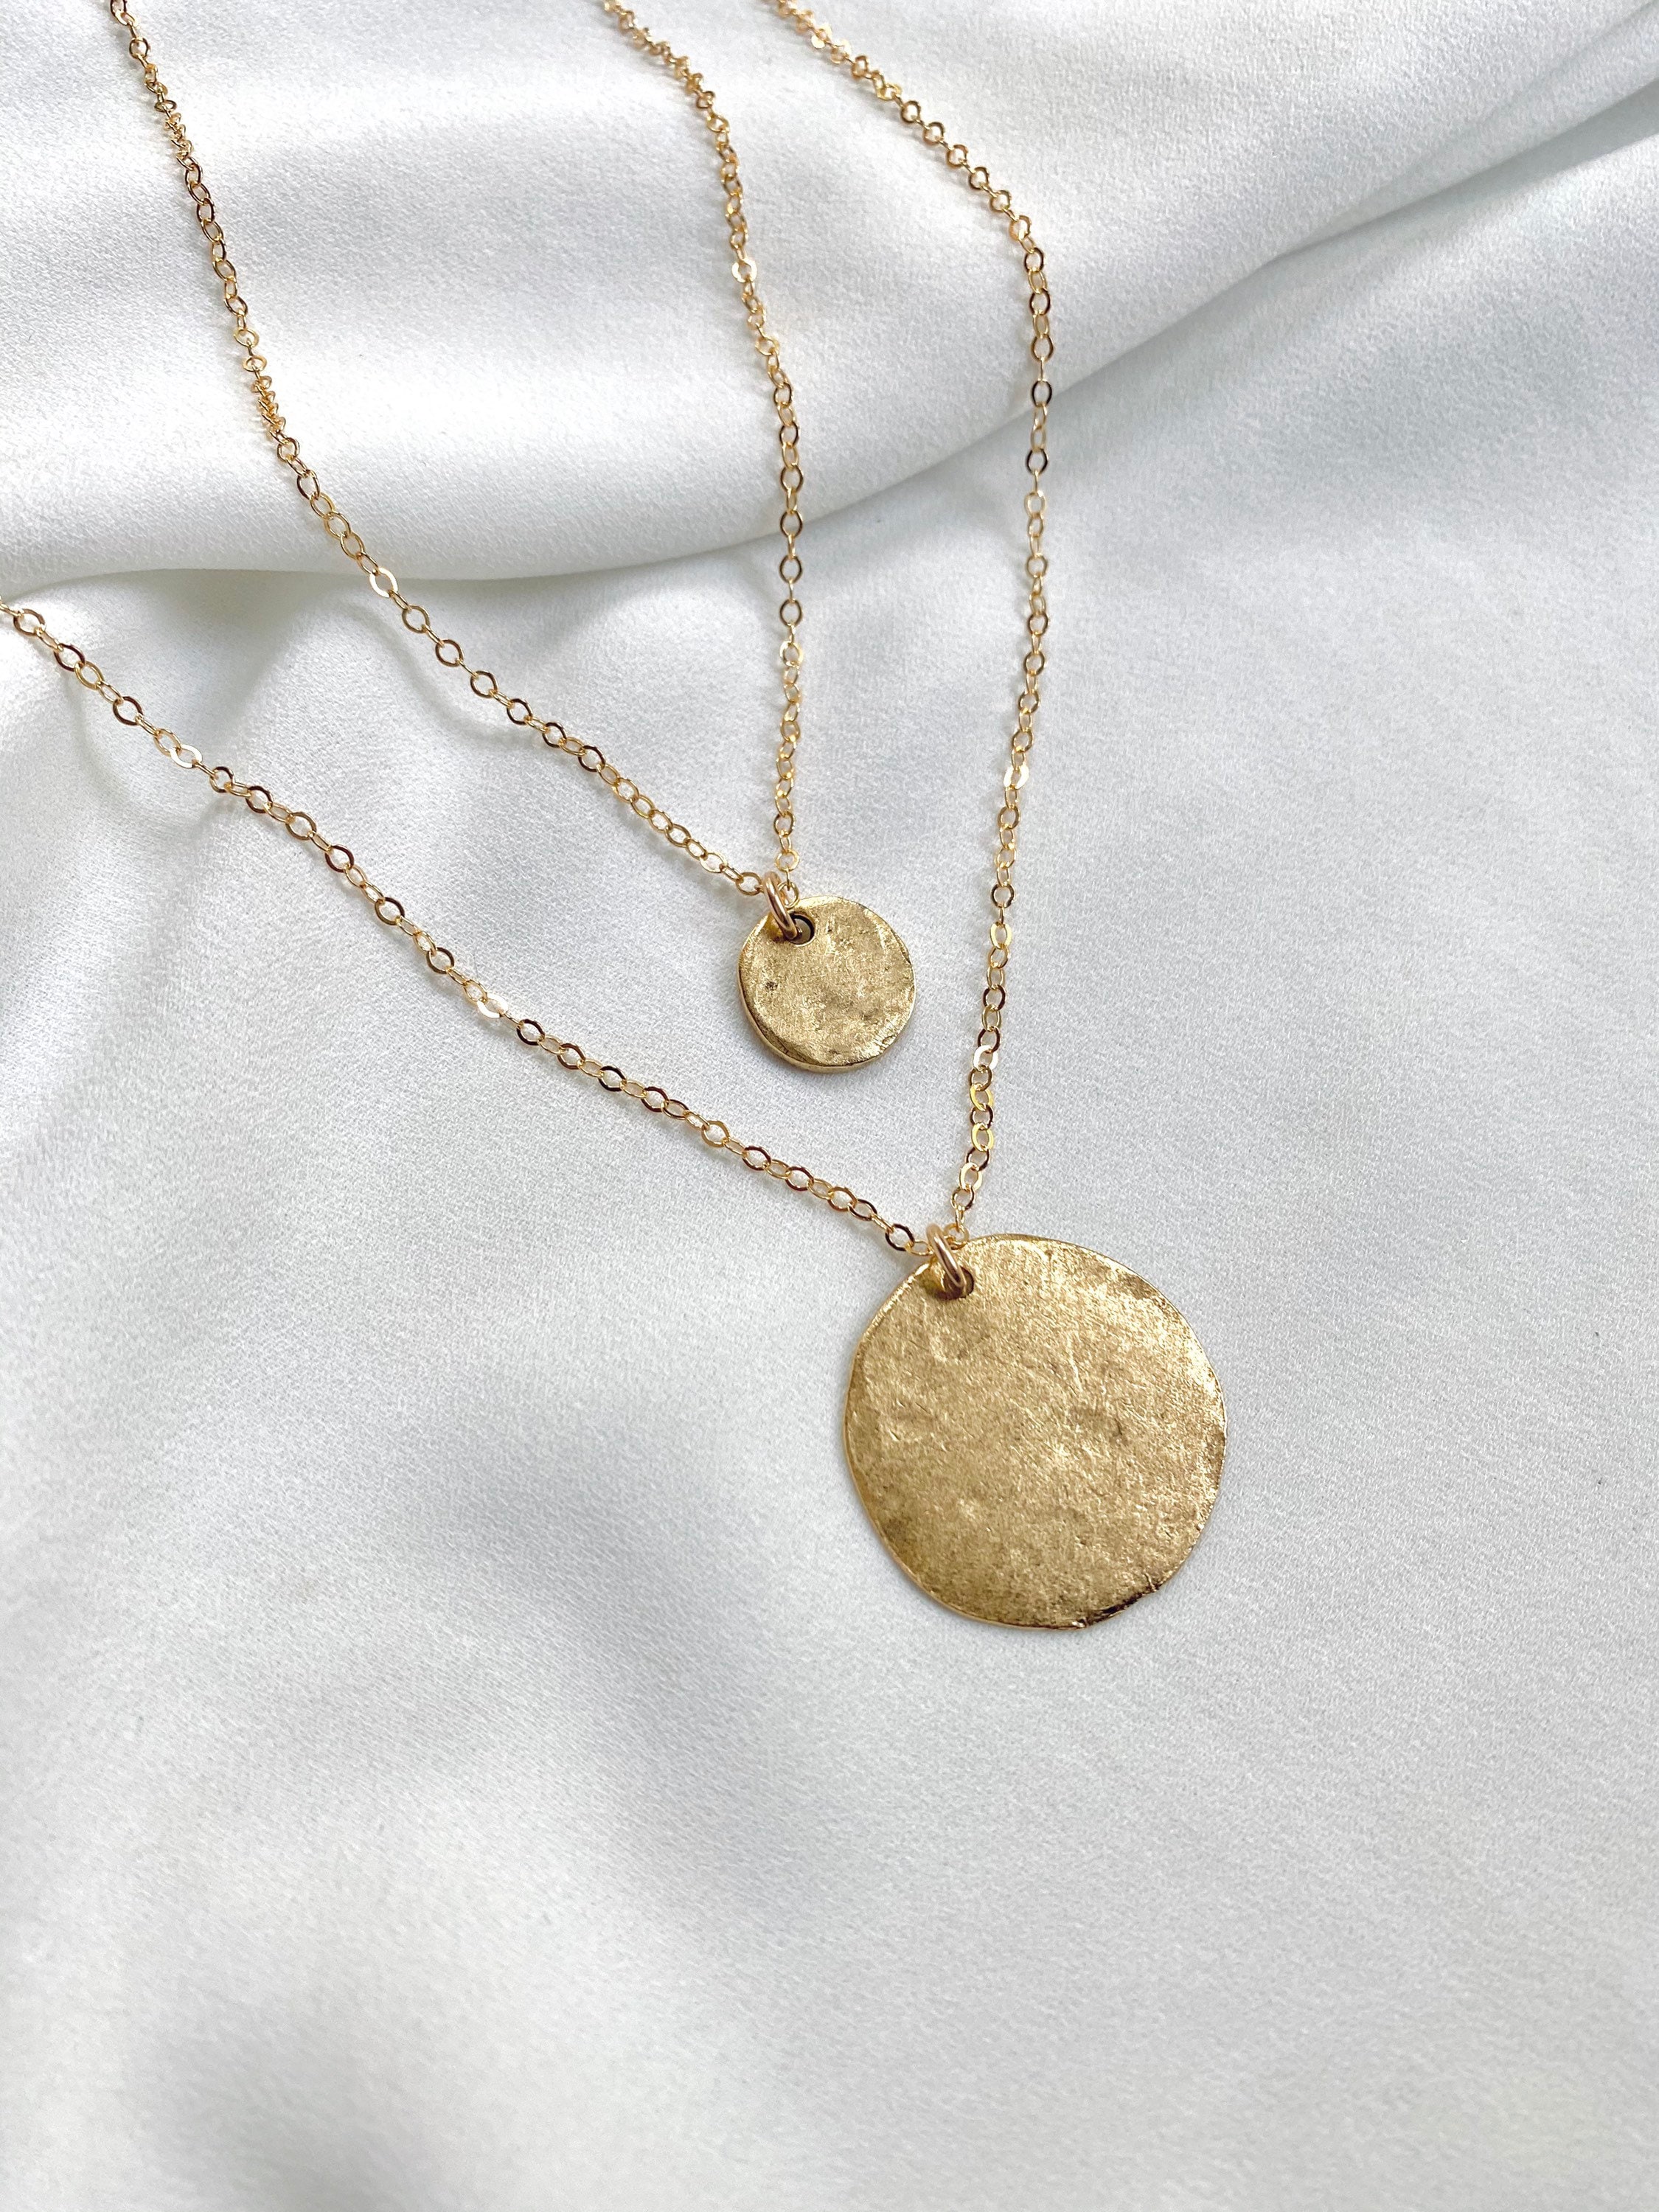 14K Gold Circle Initial Charm Necklace - 4-$59.00 / 20 inchs